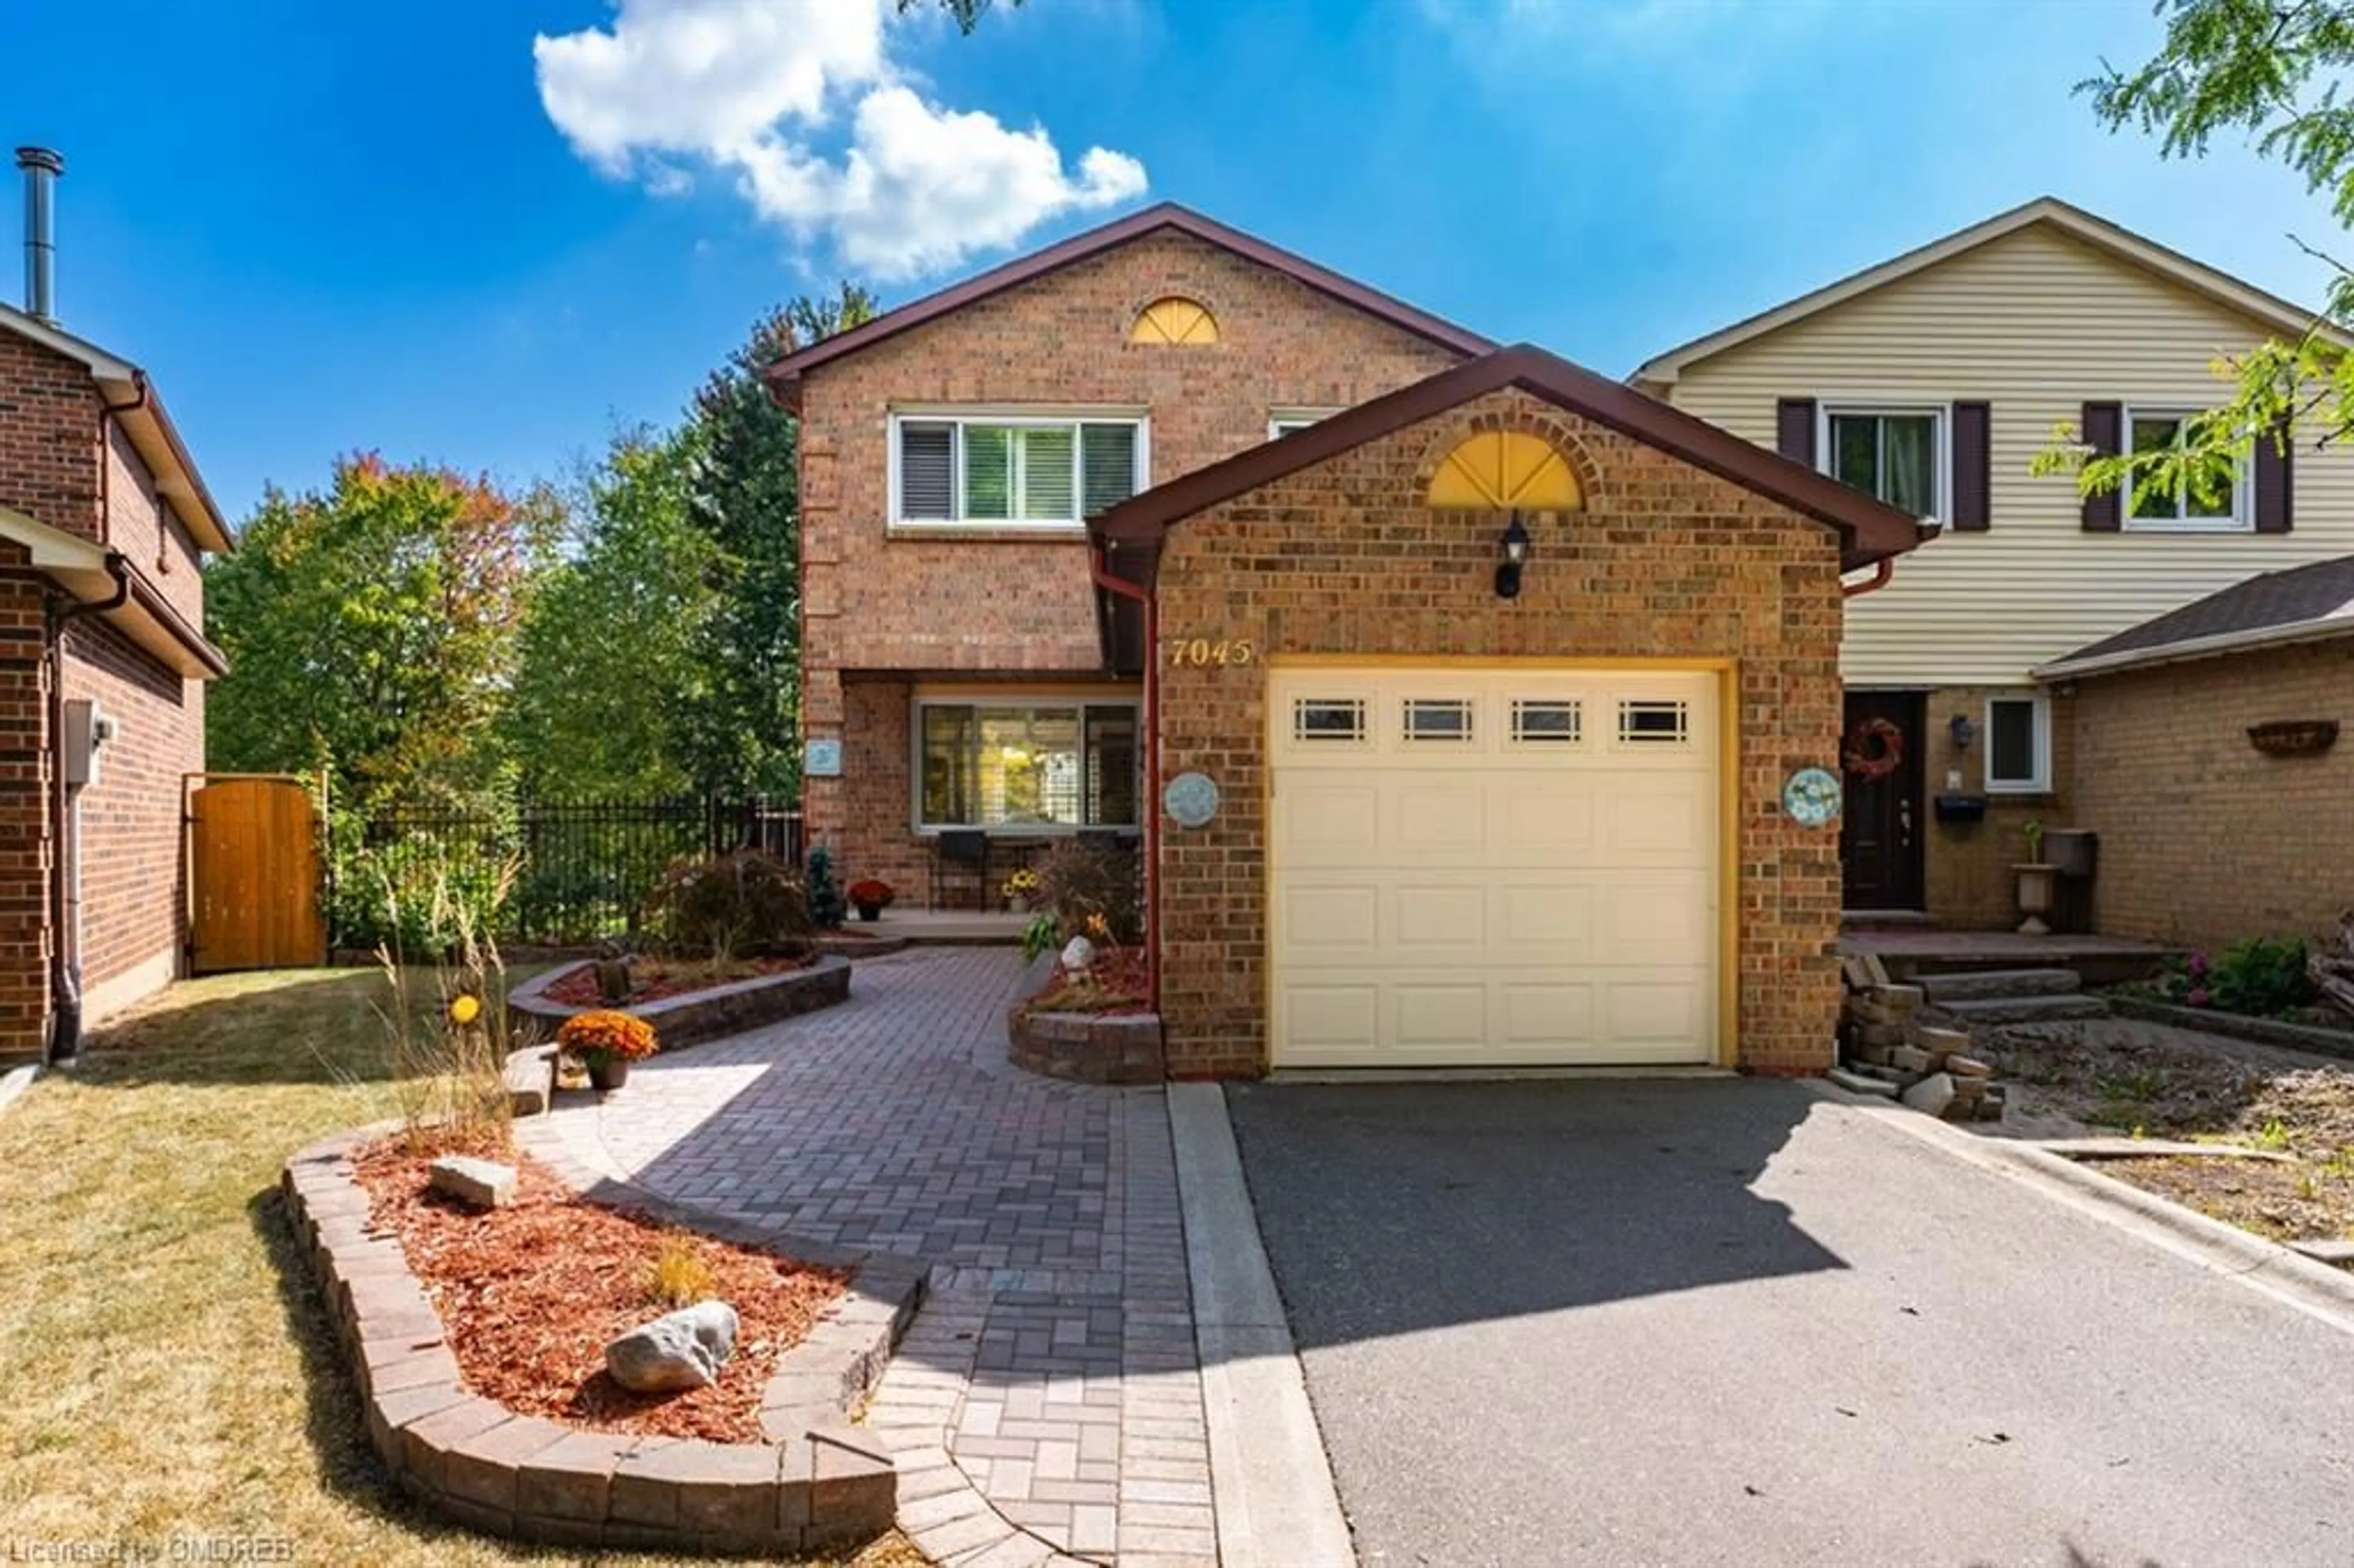 Home with brick exterior material for 7045 Tamar Mews, Mississauga Ontario L5N 3S2